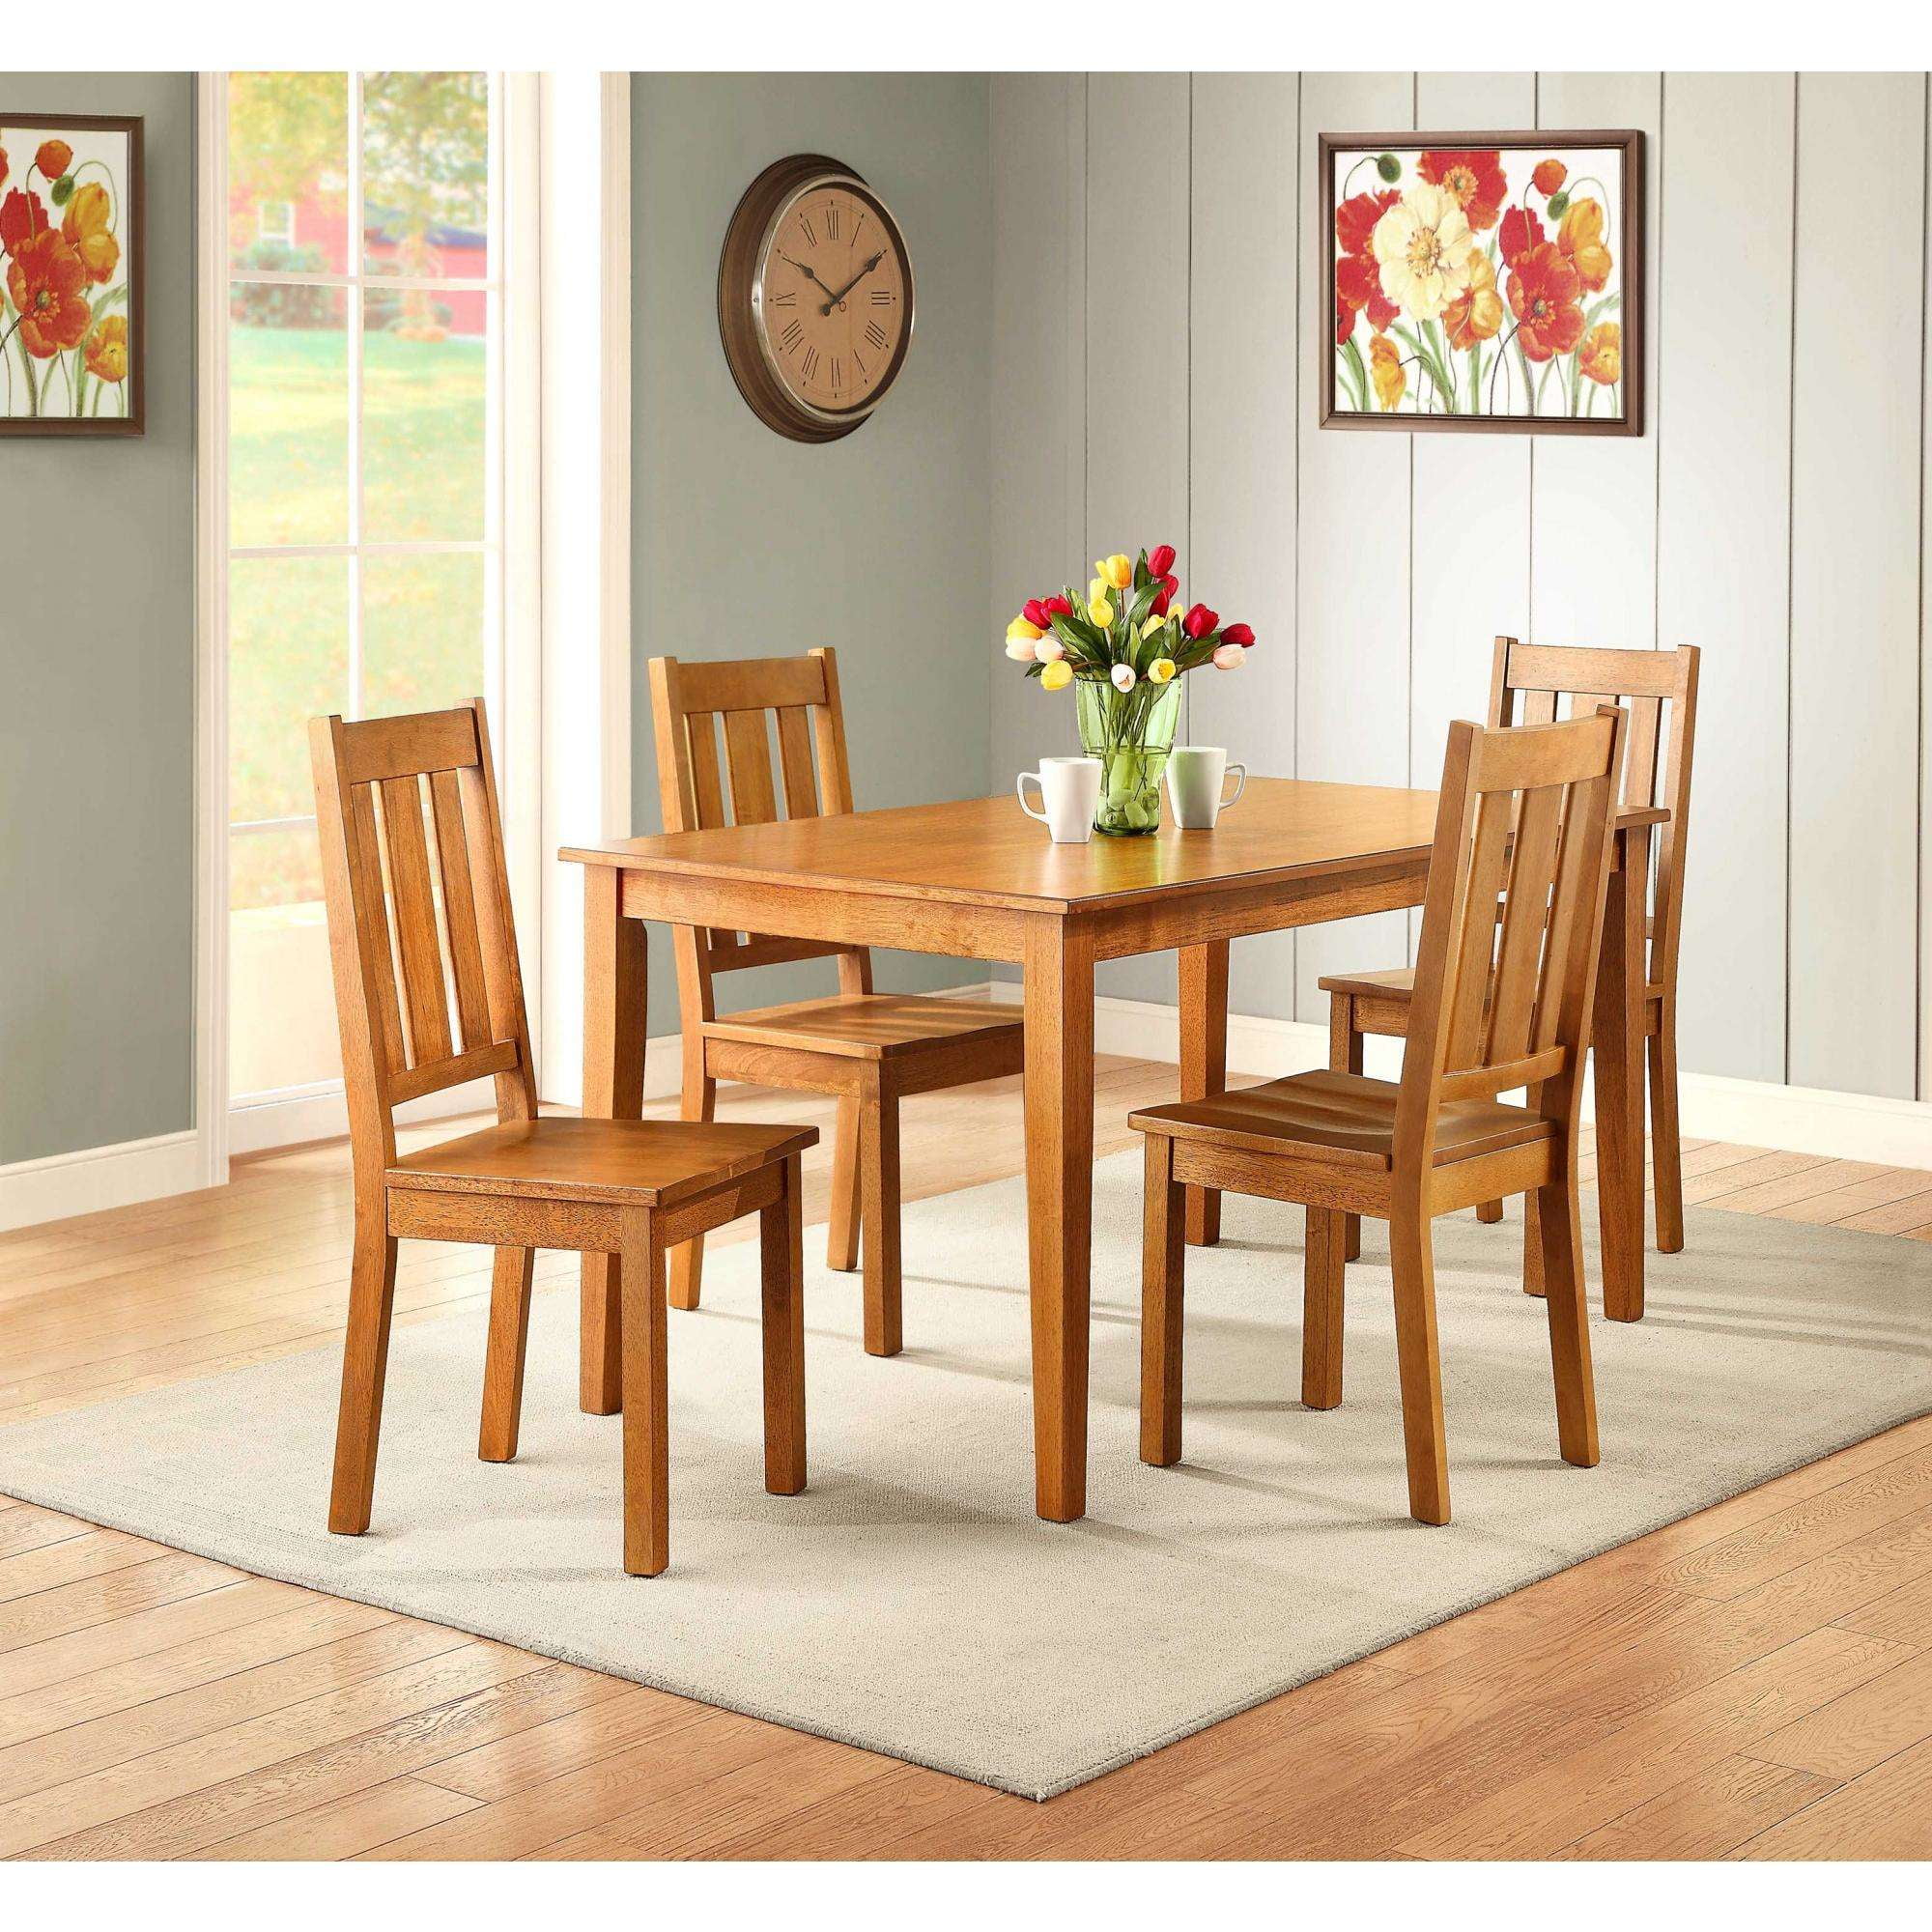 Unique Better Homes And Gardens Dining Room Furniture with Simple Decor